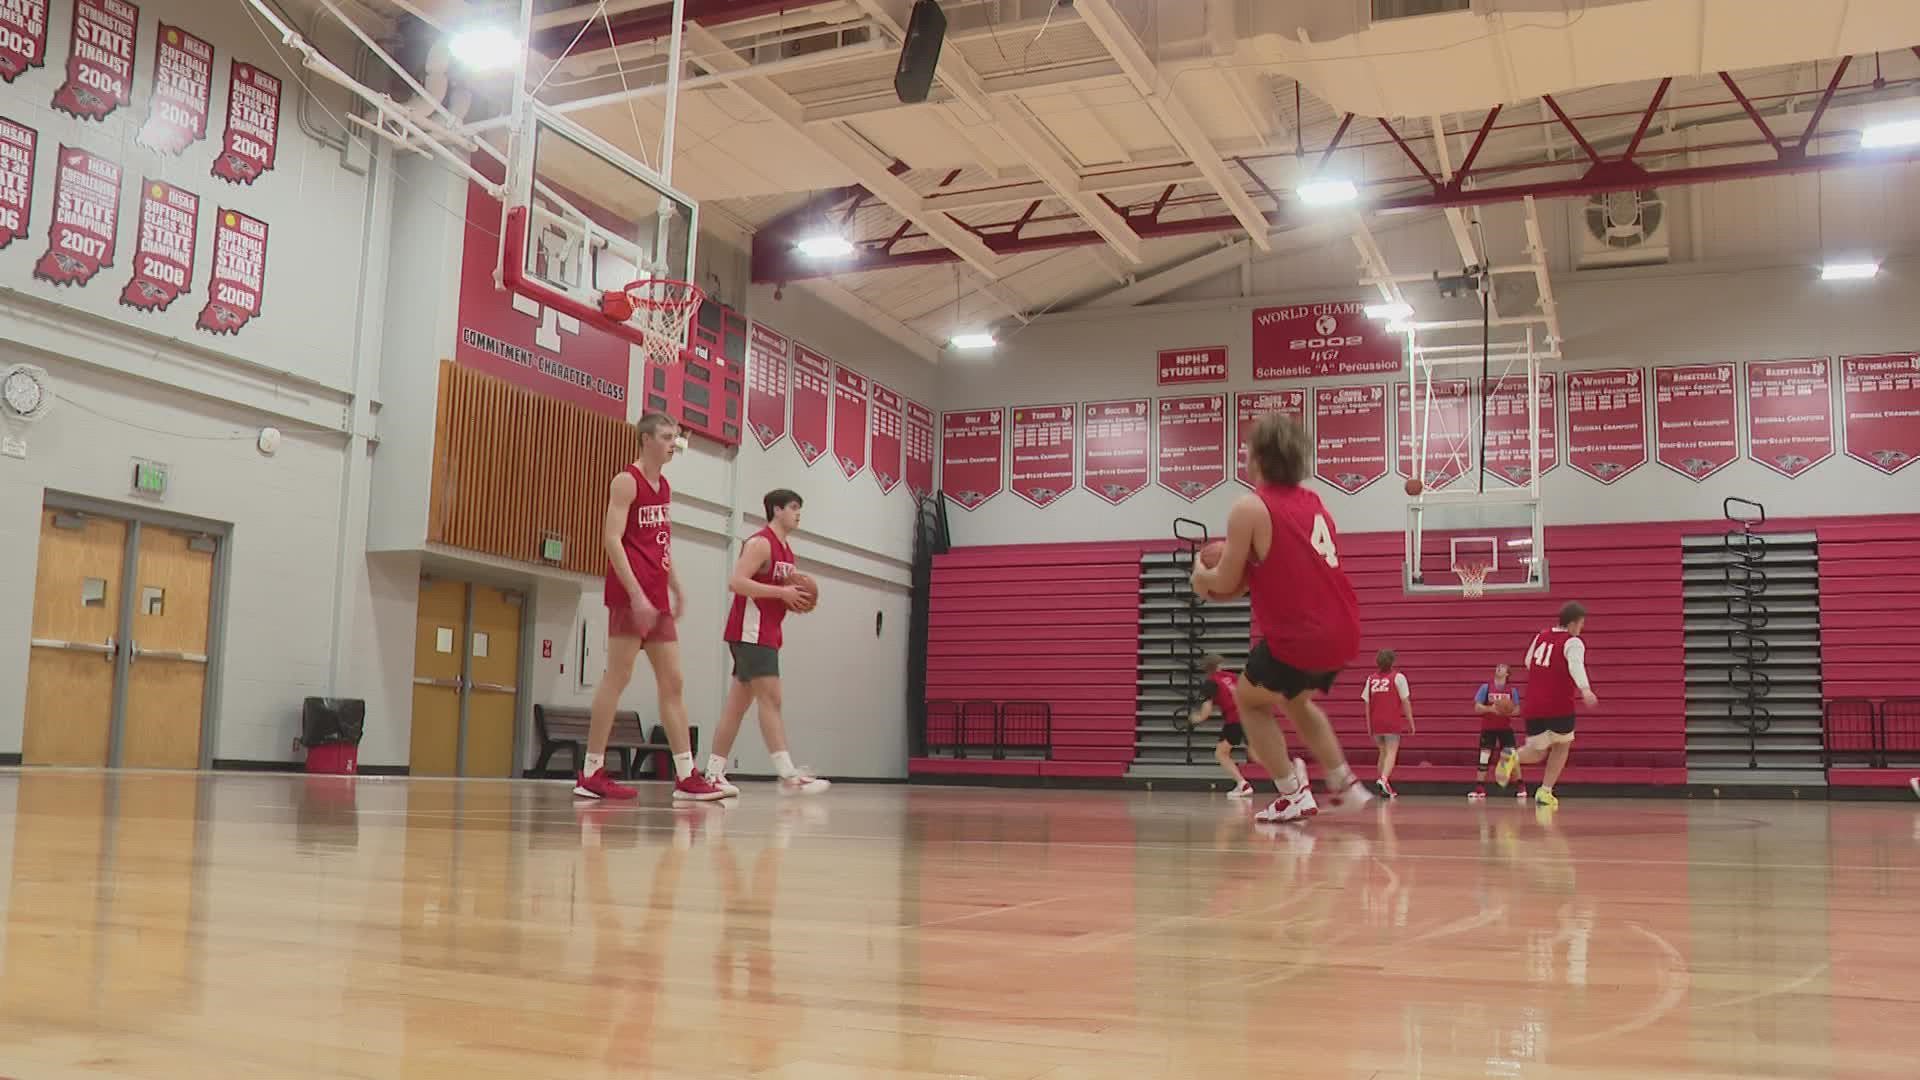 New Palestine is one of two teams in the state who remain undefeated this season.